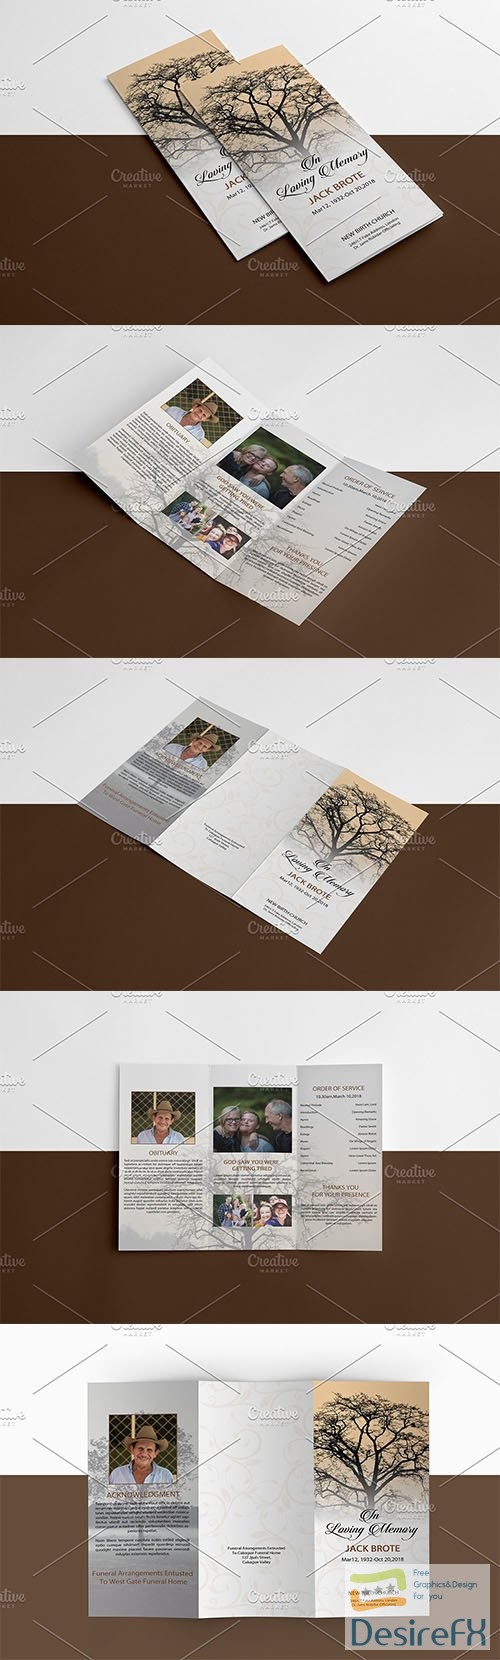 CreativeMarket - Trifold Funeral Template - V849 3283833